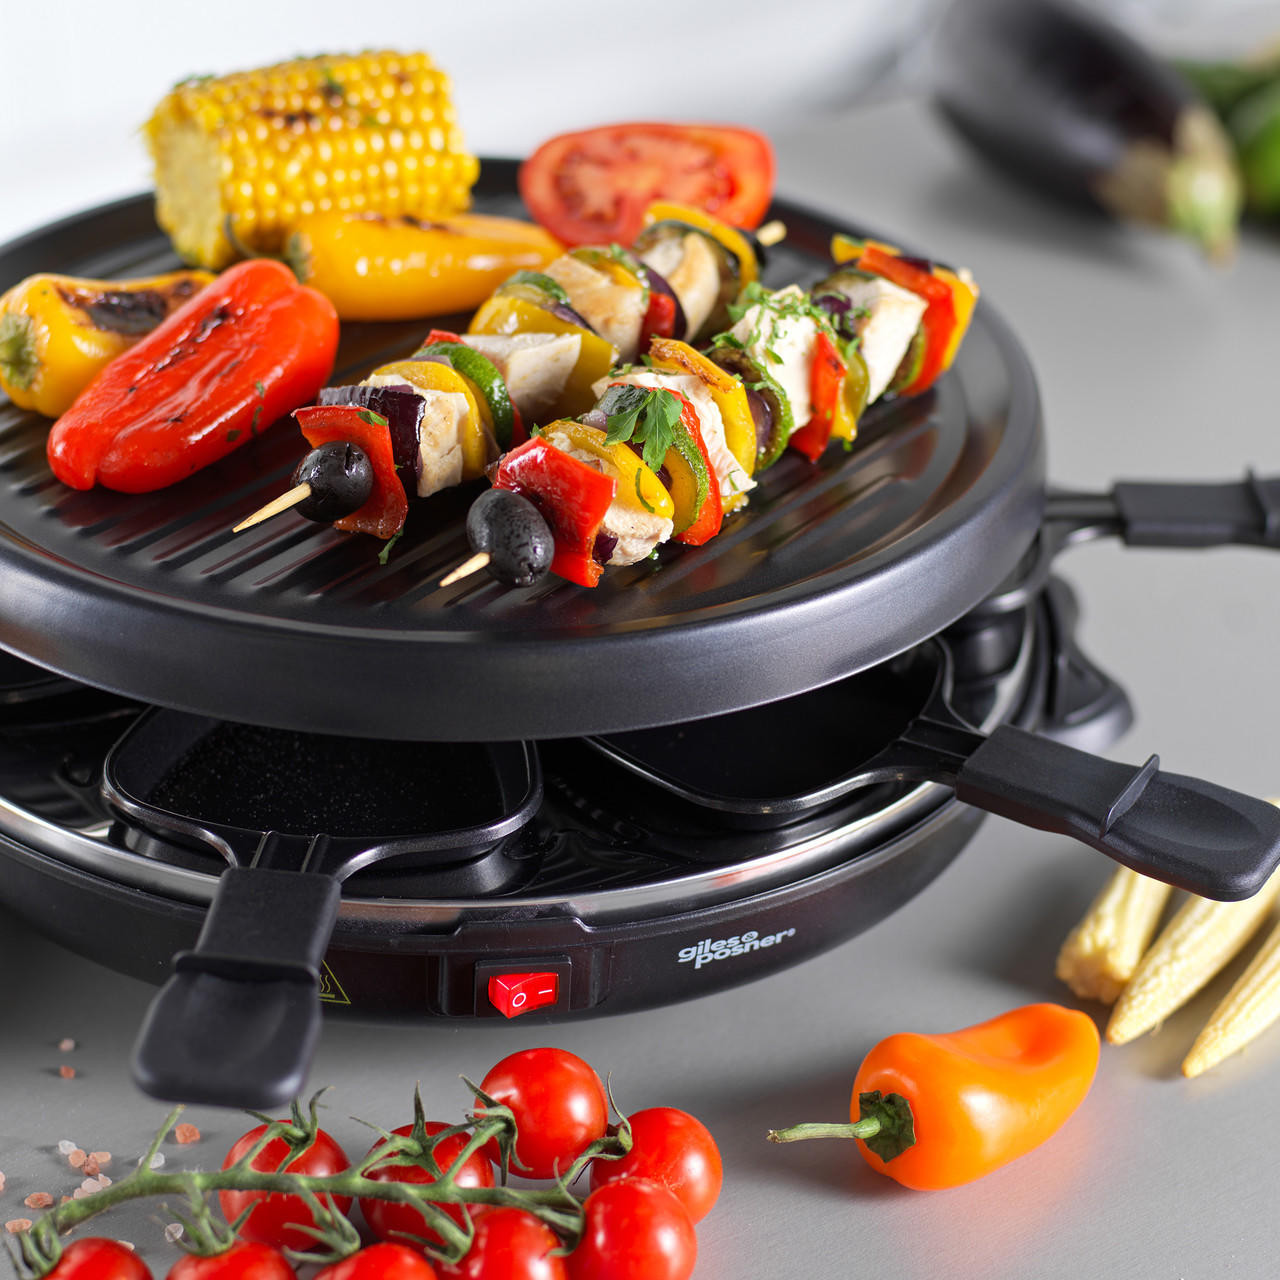 Buy Giles & Posner Electric Raclette Grill